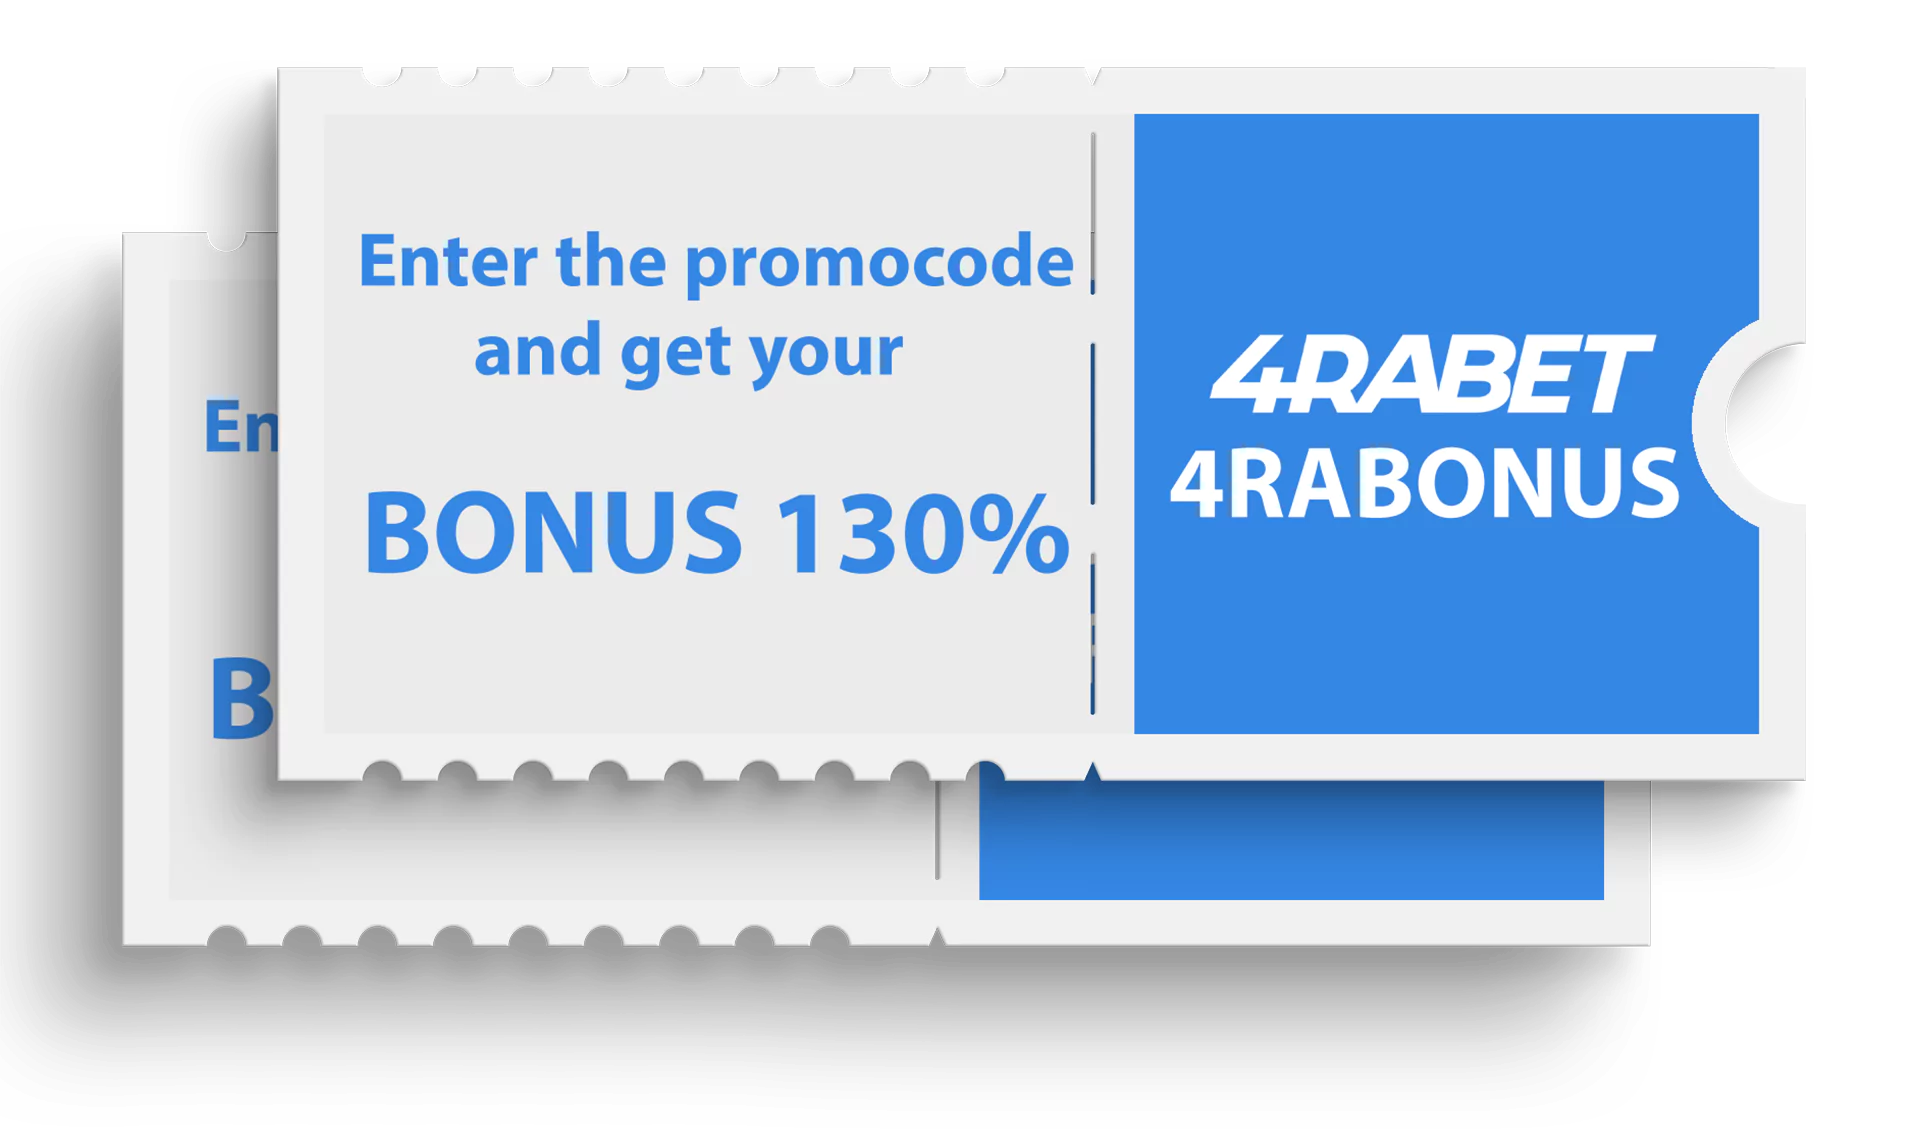 Use our promocode to get advantages after registration and depositing at 4rabet.